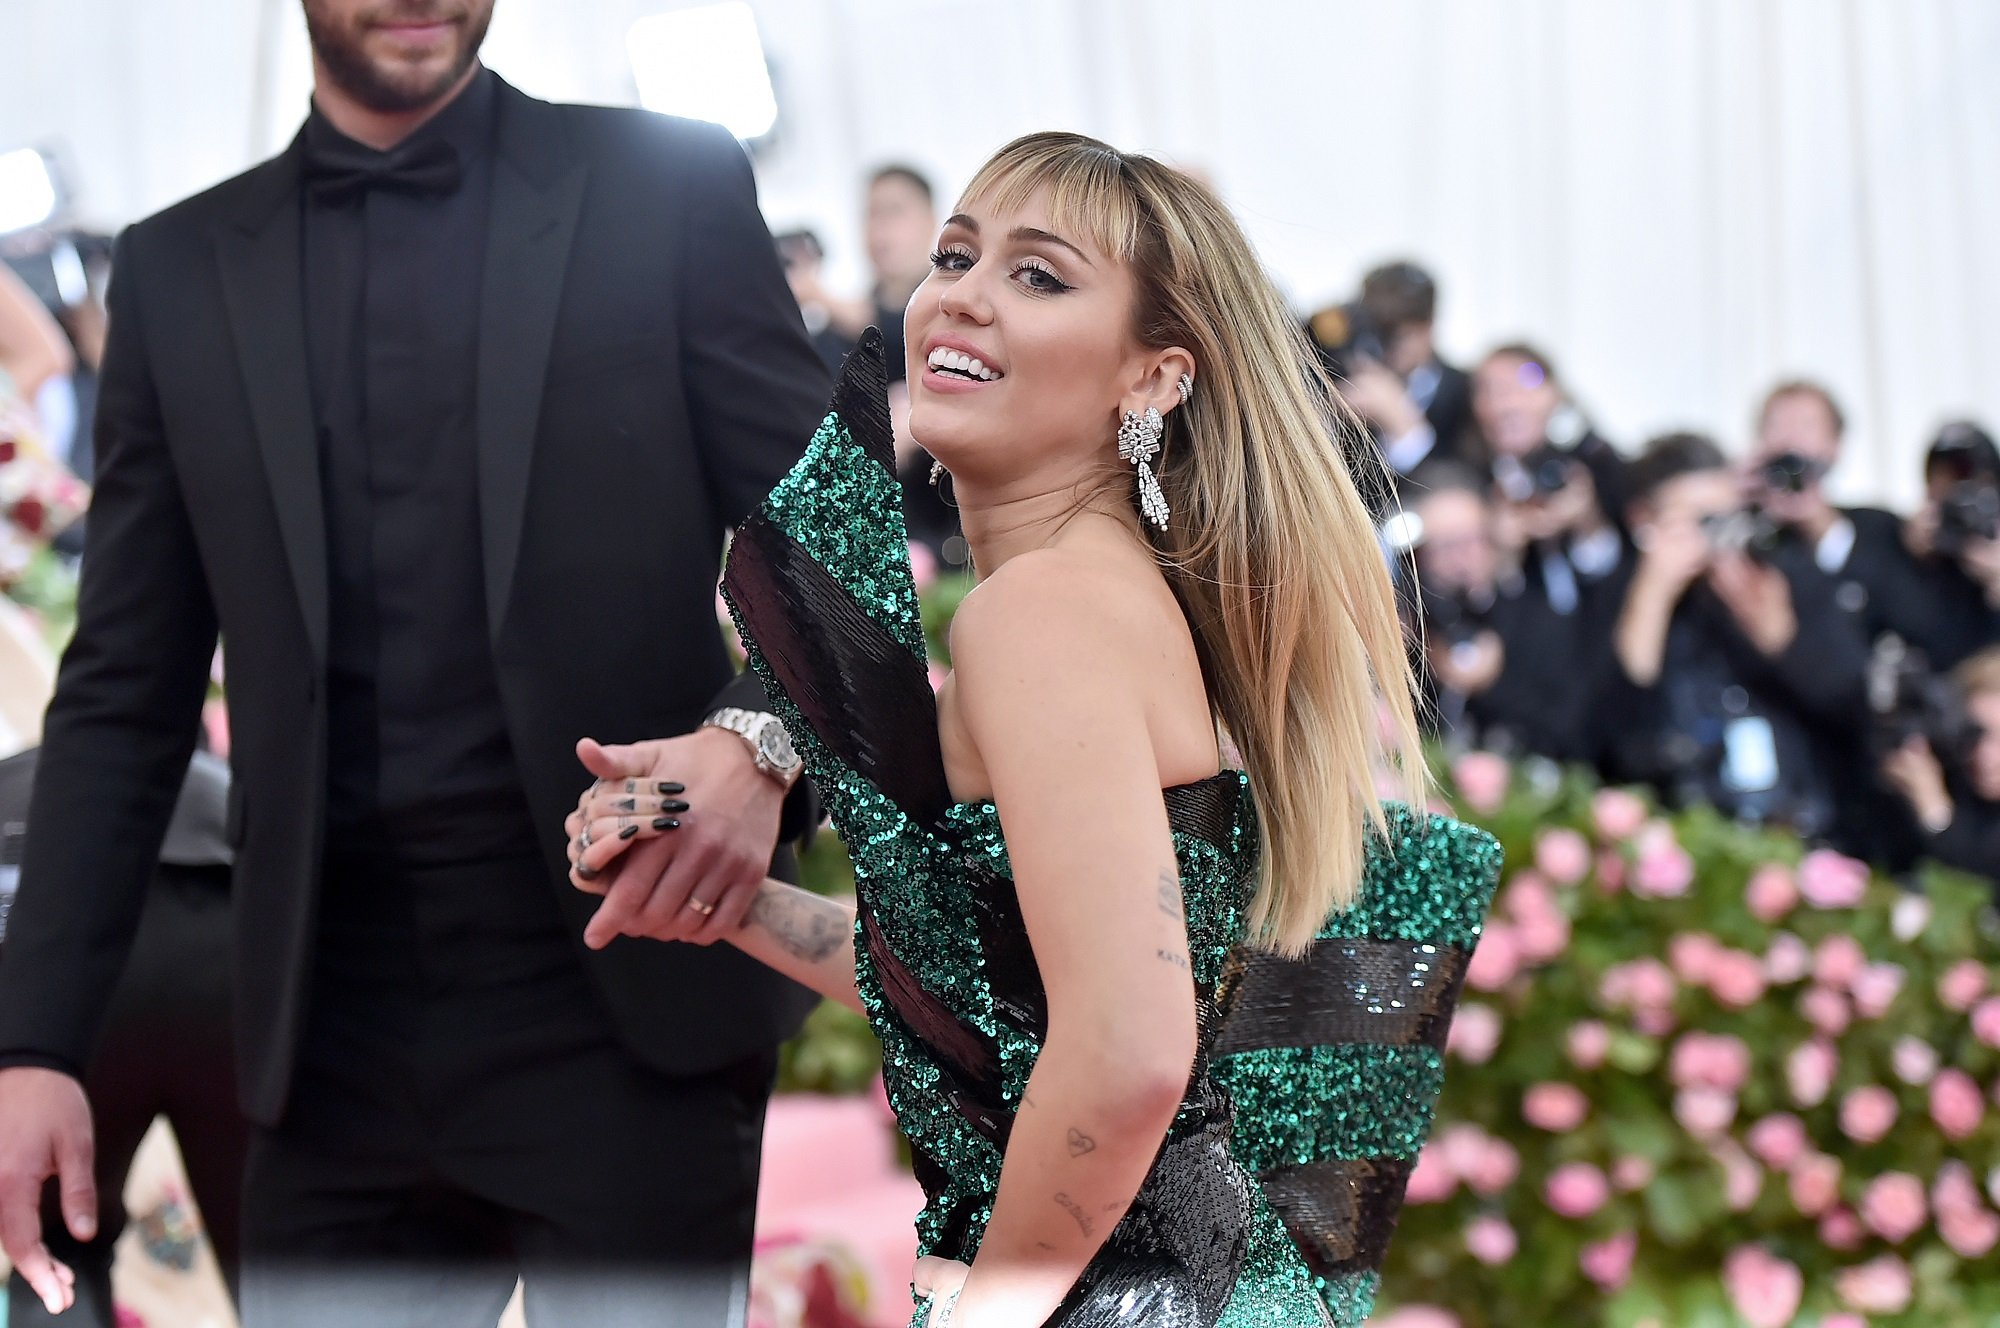 Miley Cyrus attends the 2019 Met Gala on May 06, 2019 in New York City.